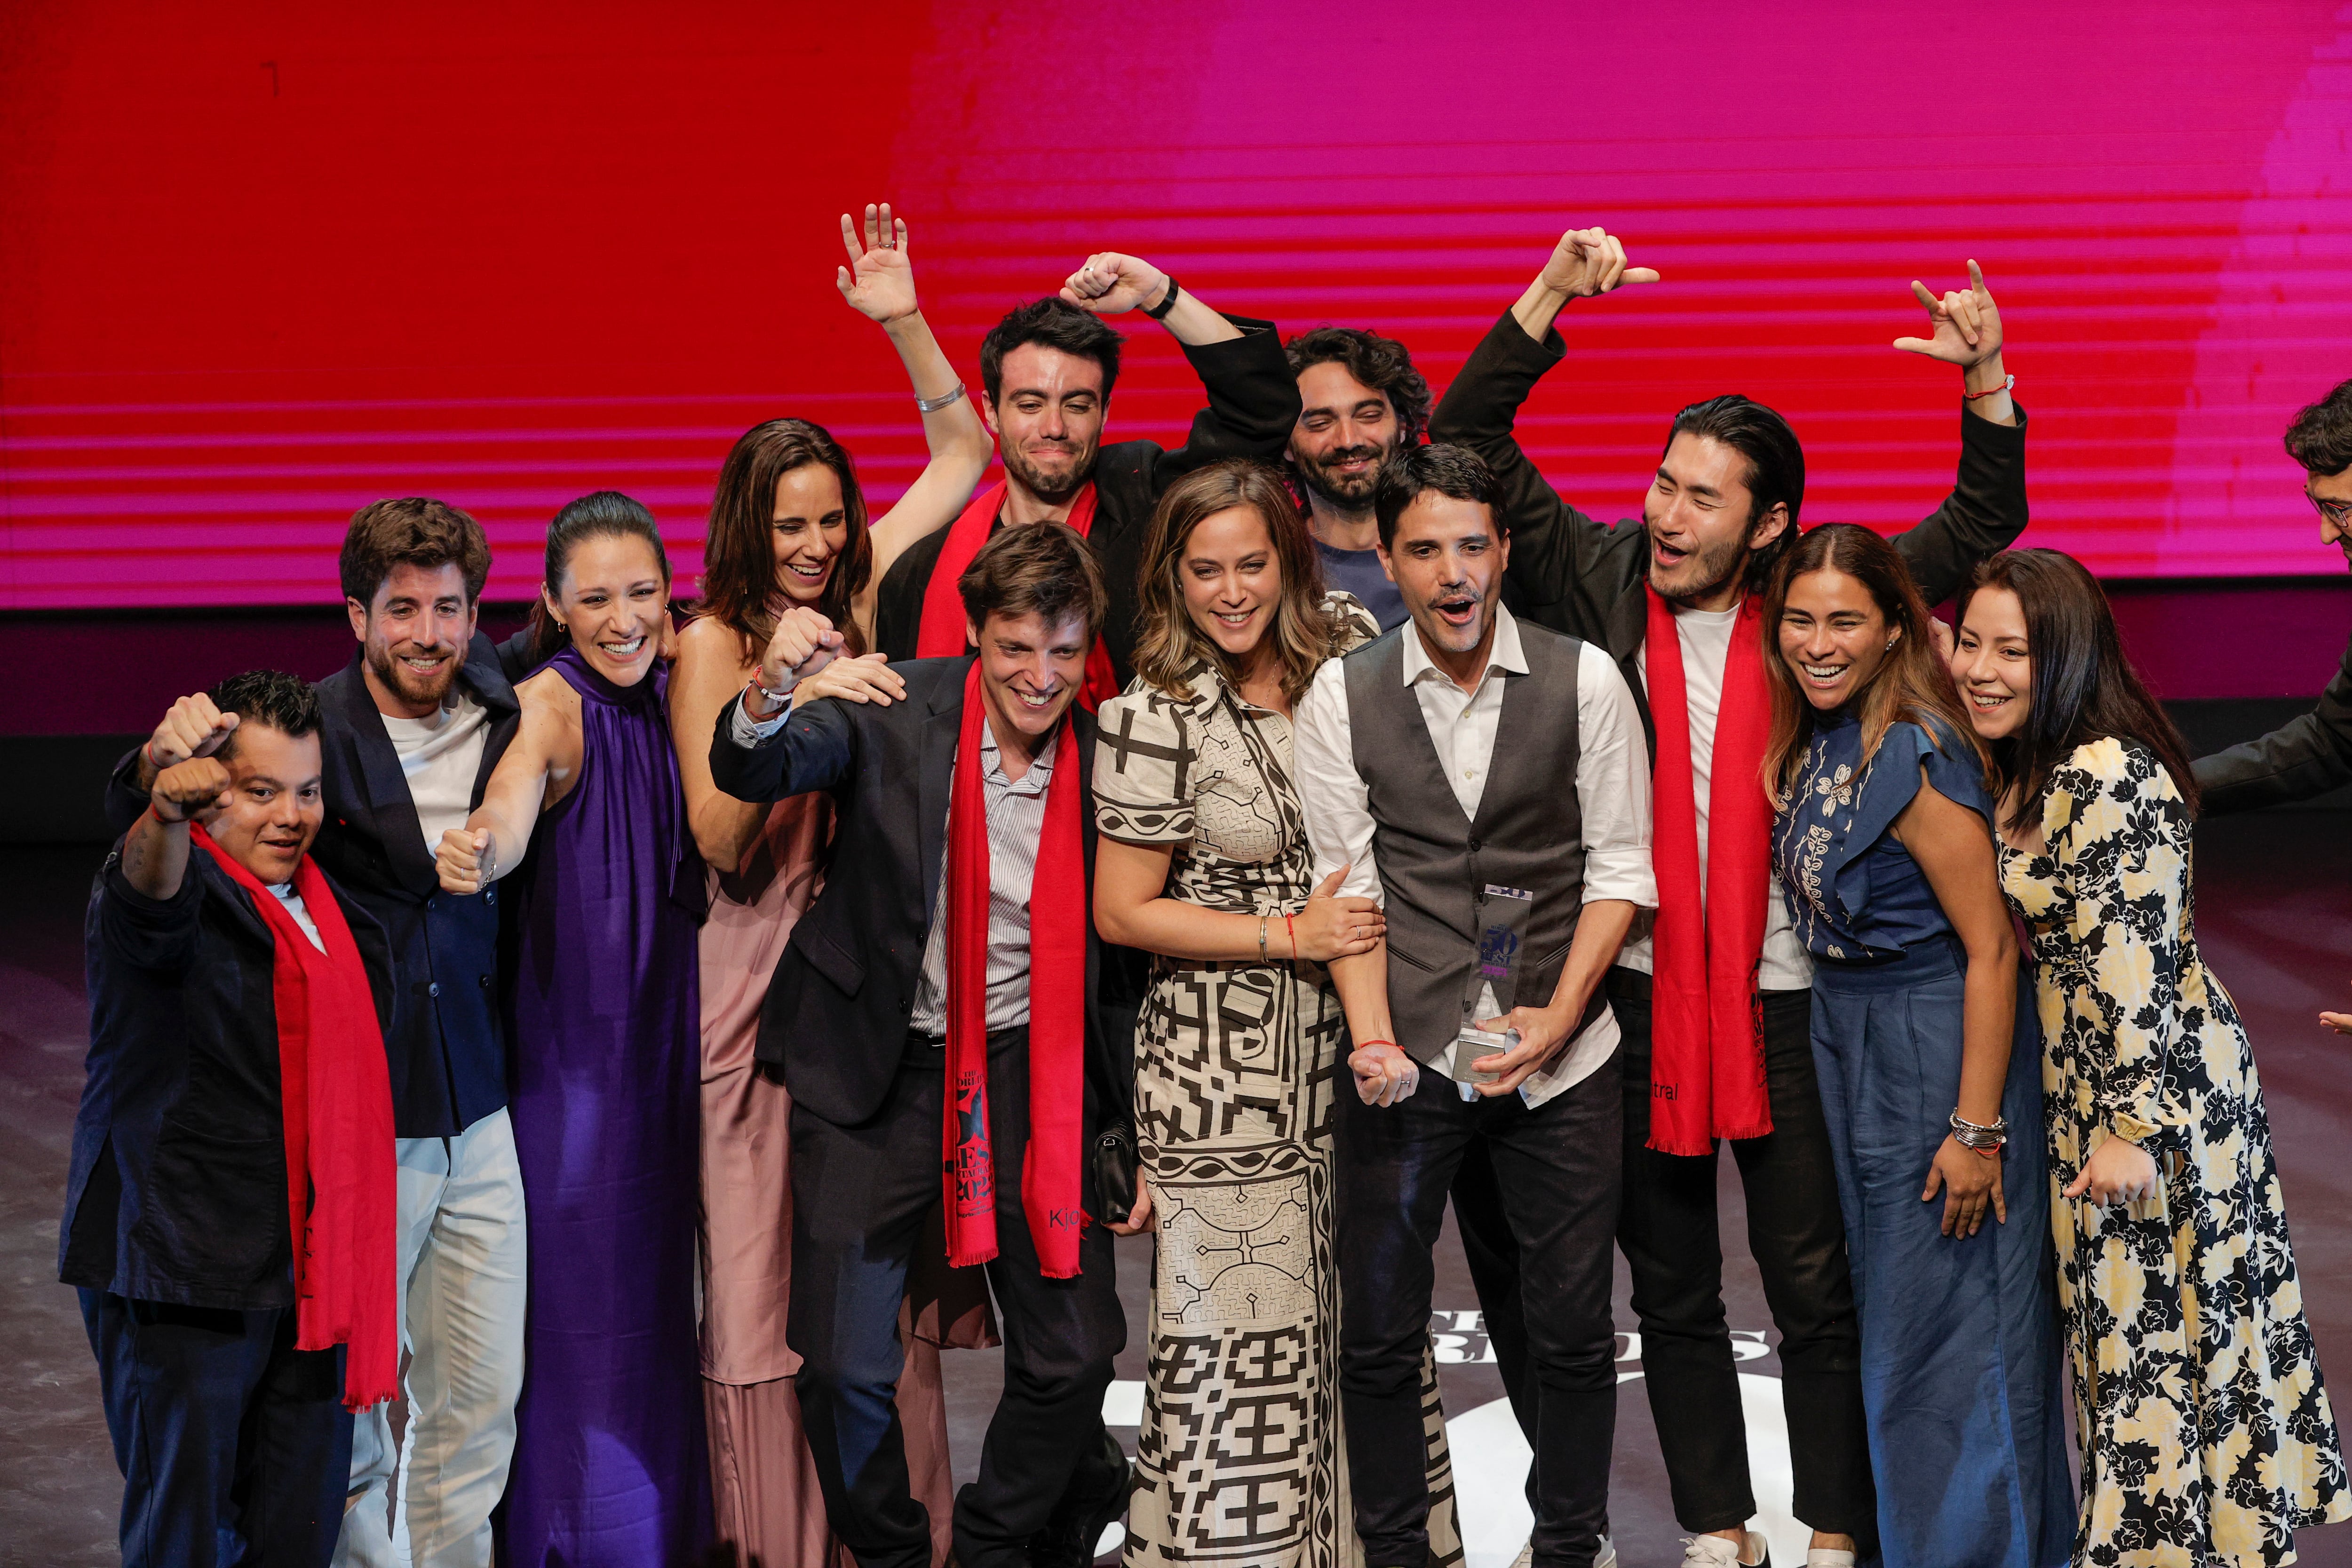 Virgilio Martínez and Pía León, owners of the Peruvian restaurant Central, along with their team, receive the award for the World’s Best Restaurant 2023, during the World’s 50 Best Restaurants gala.